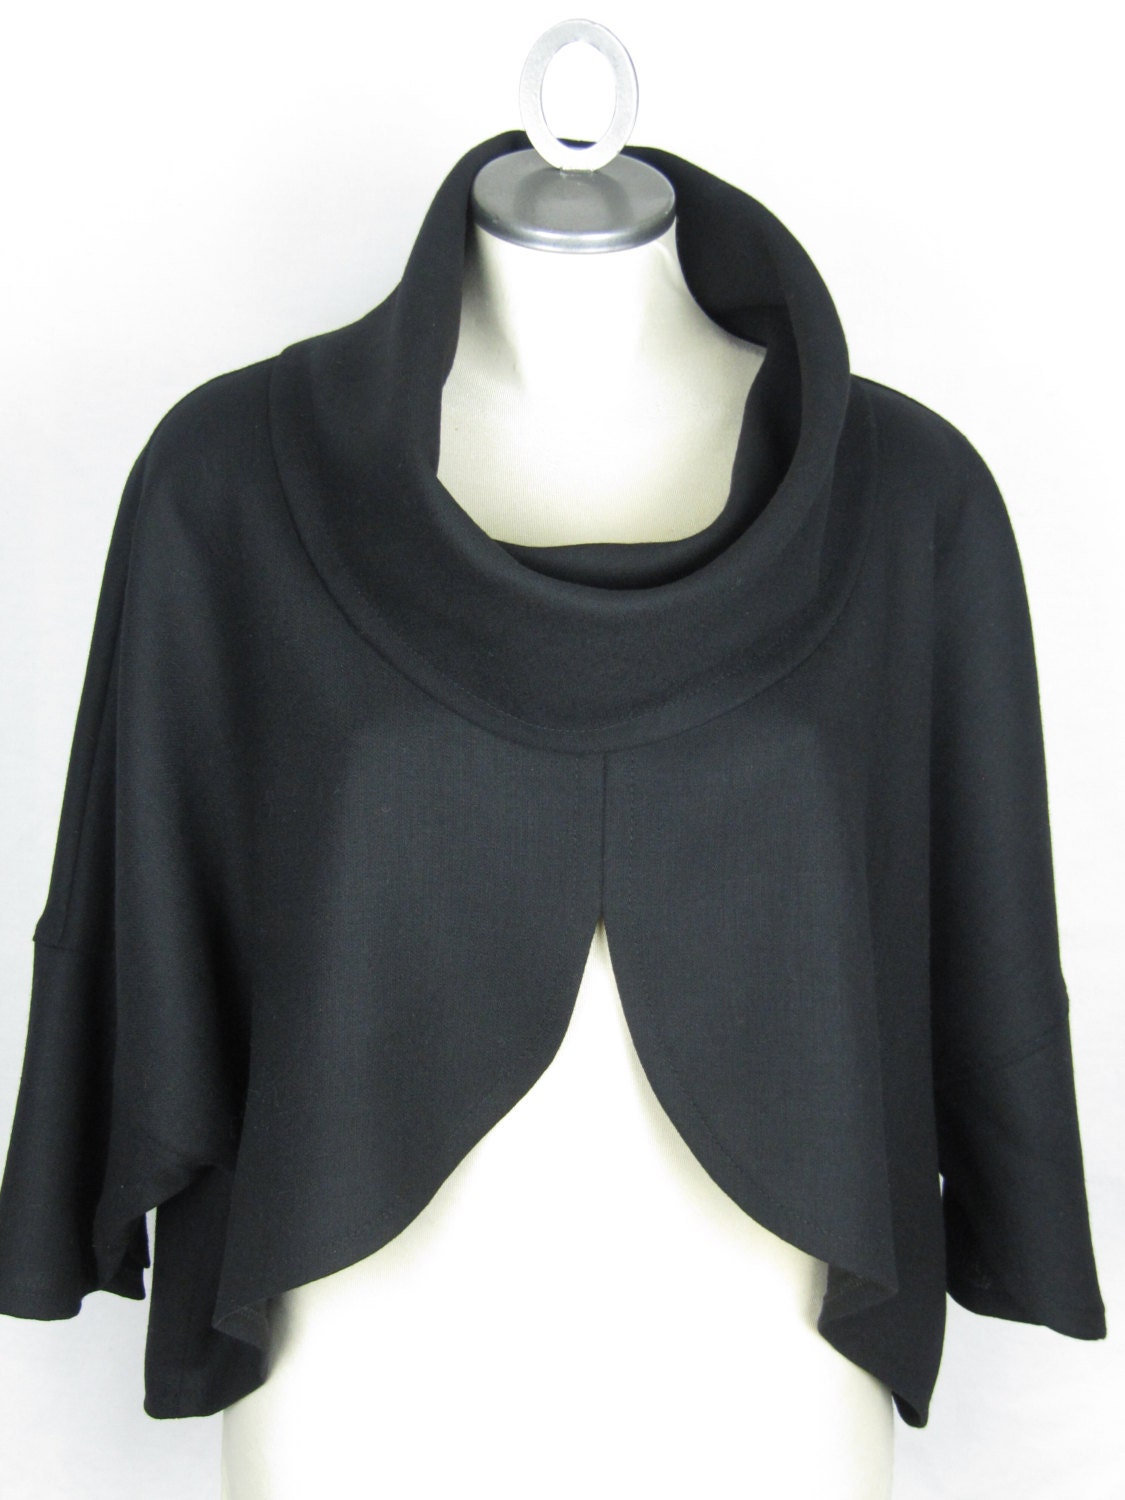 Women clothing classic style loose fit top pure wool black